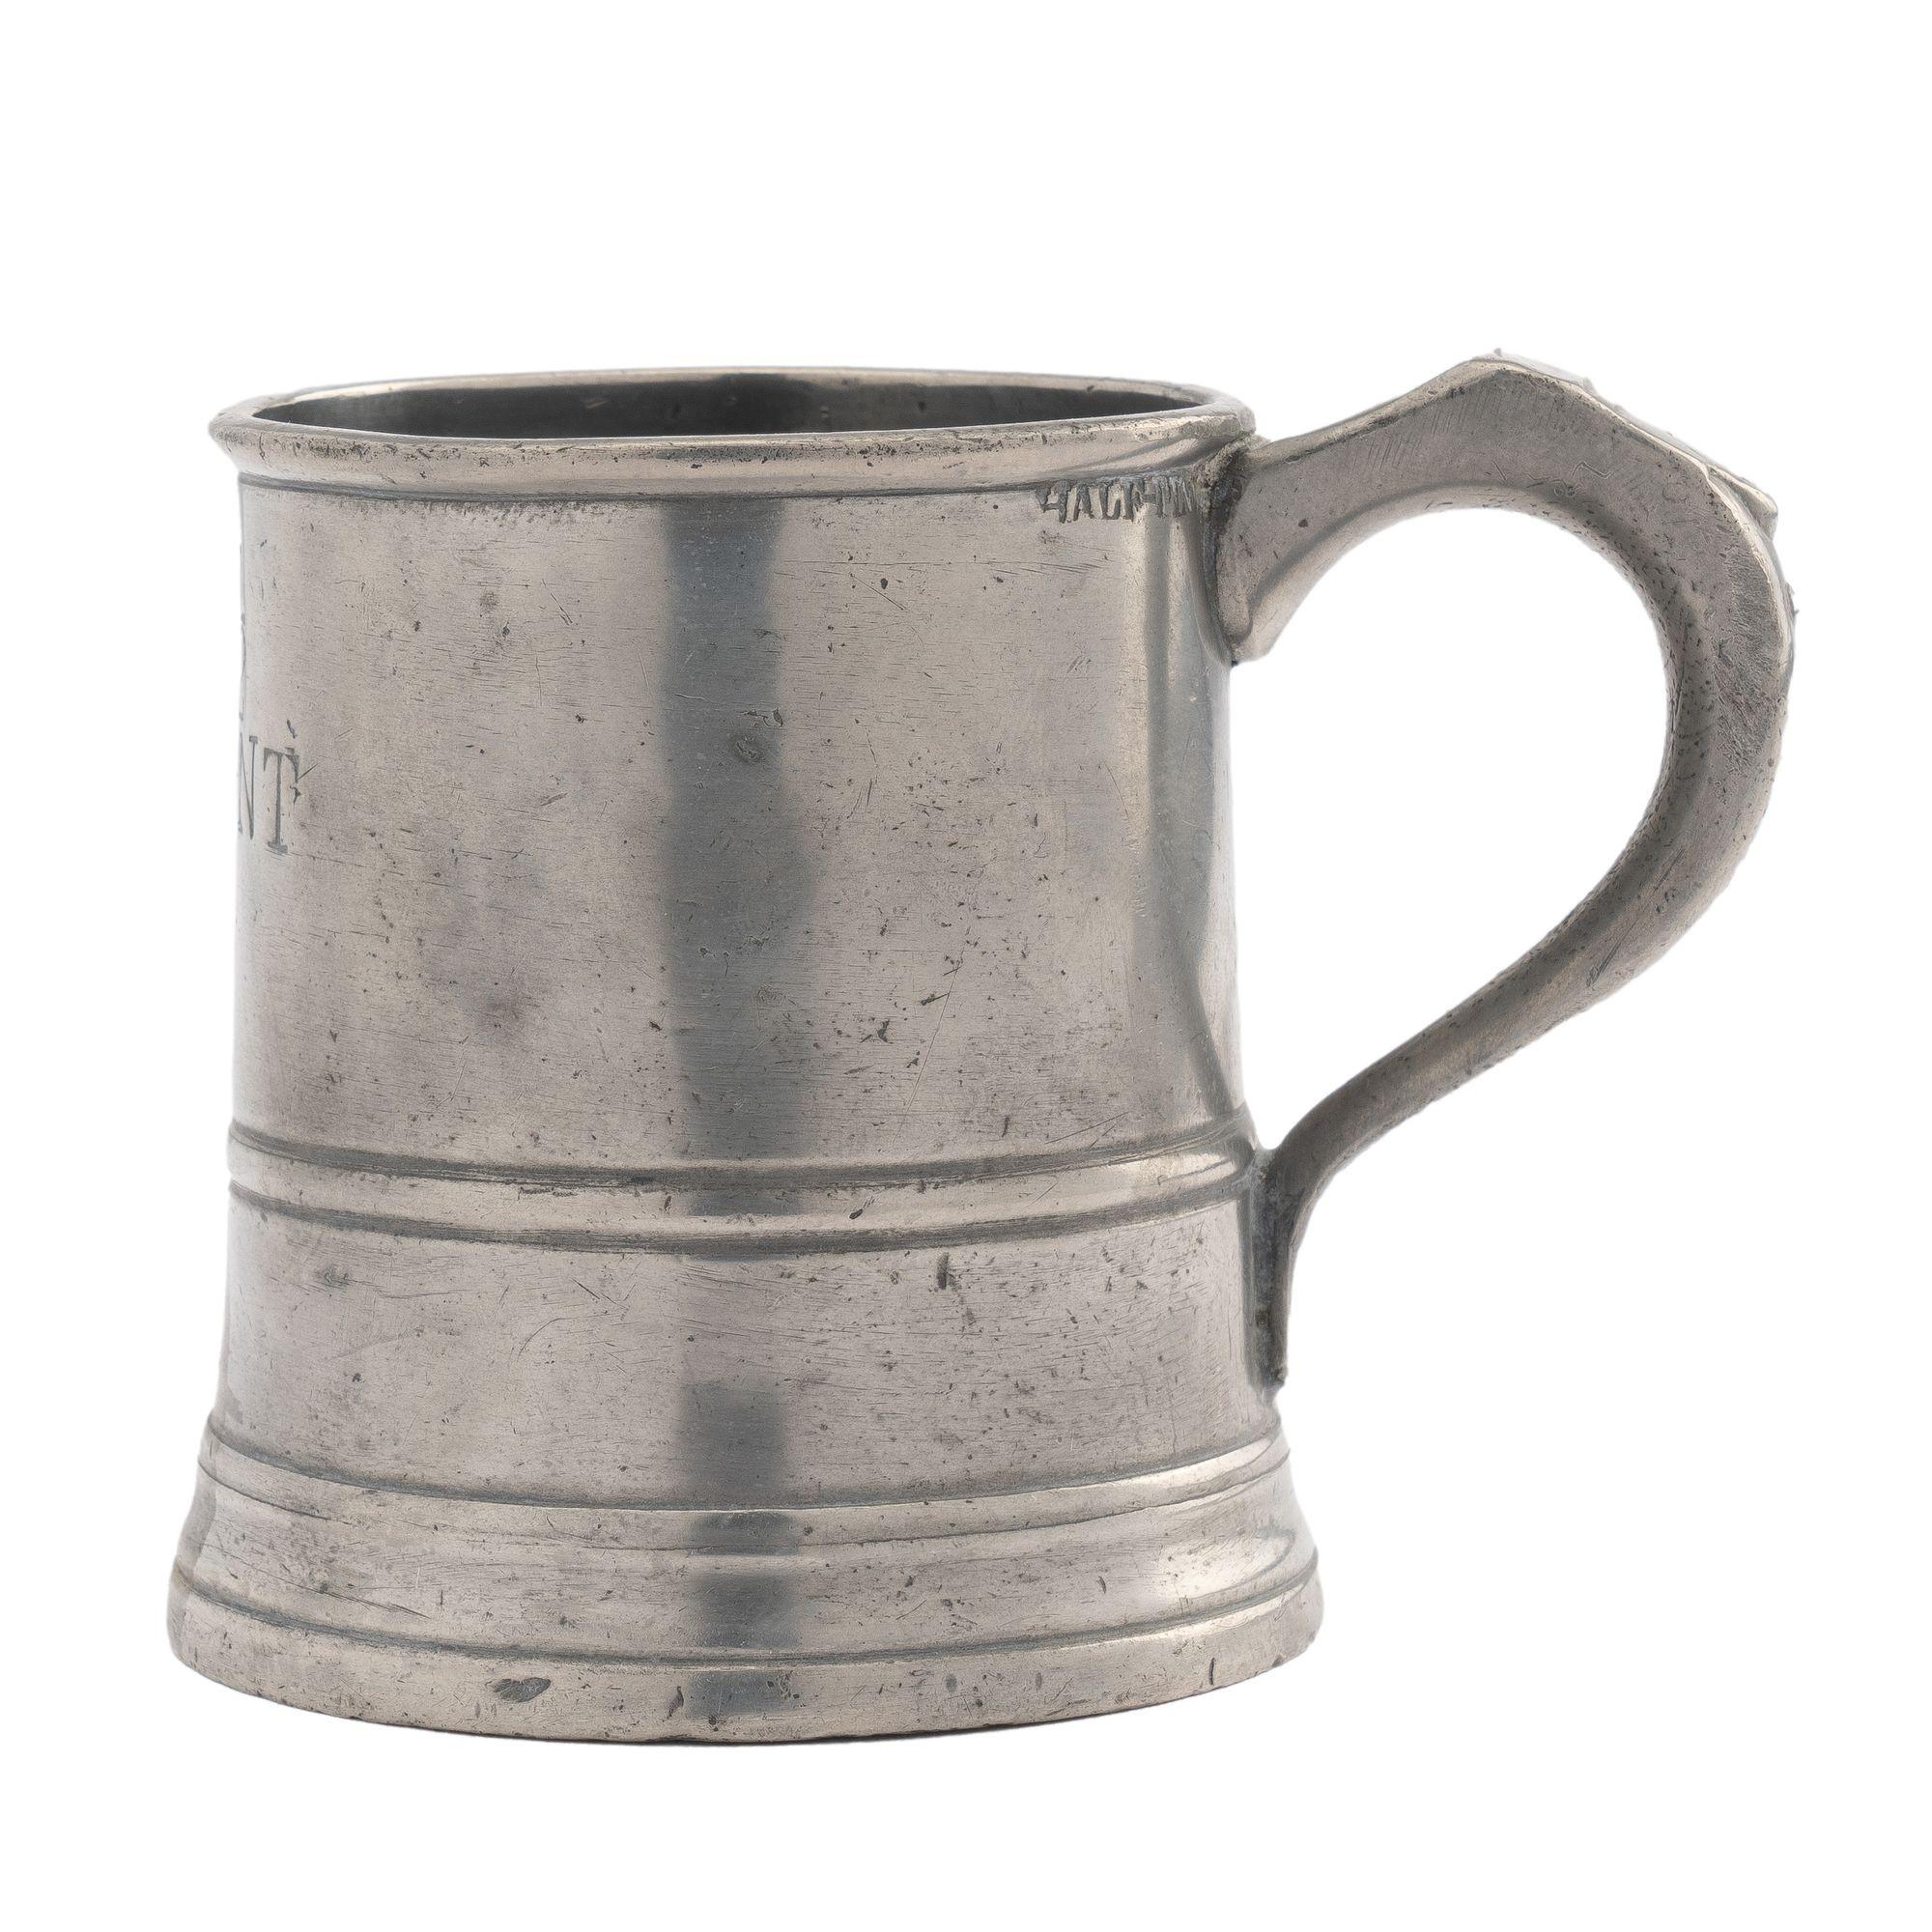 English pewter mug stamped with the measurement 1/2 PINT. The mug has a beaded rim and is encircled with a bead 2/3 down from the rim. The base has a bead and ogee molding extending beyond the floor of the mug. The hollow loop handle is applied to